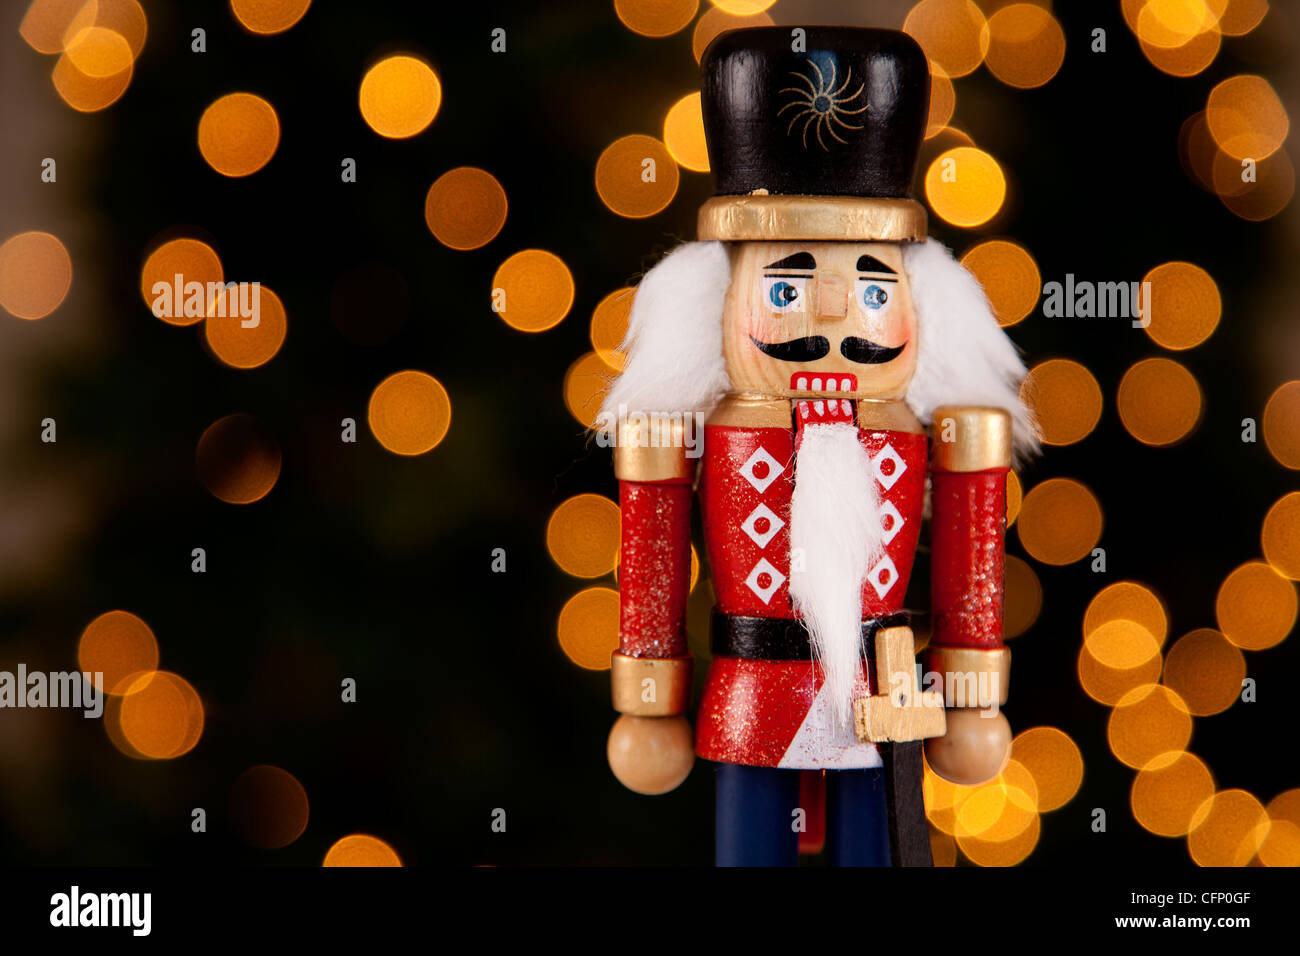 Traditional Figurine Christmas Nutcracker Wearing A Old Military Style Uniform Stock Photo